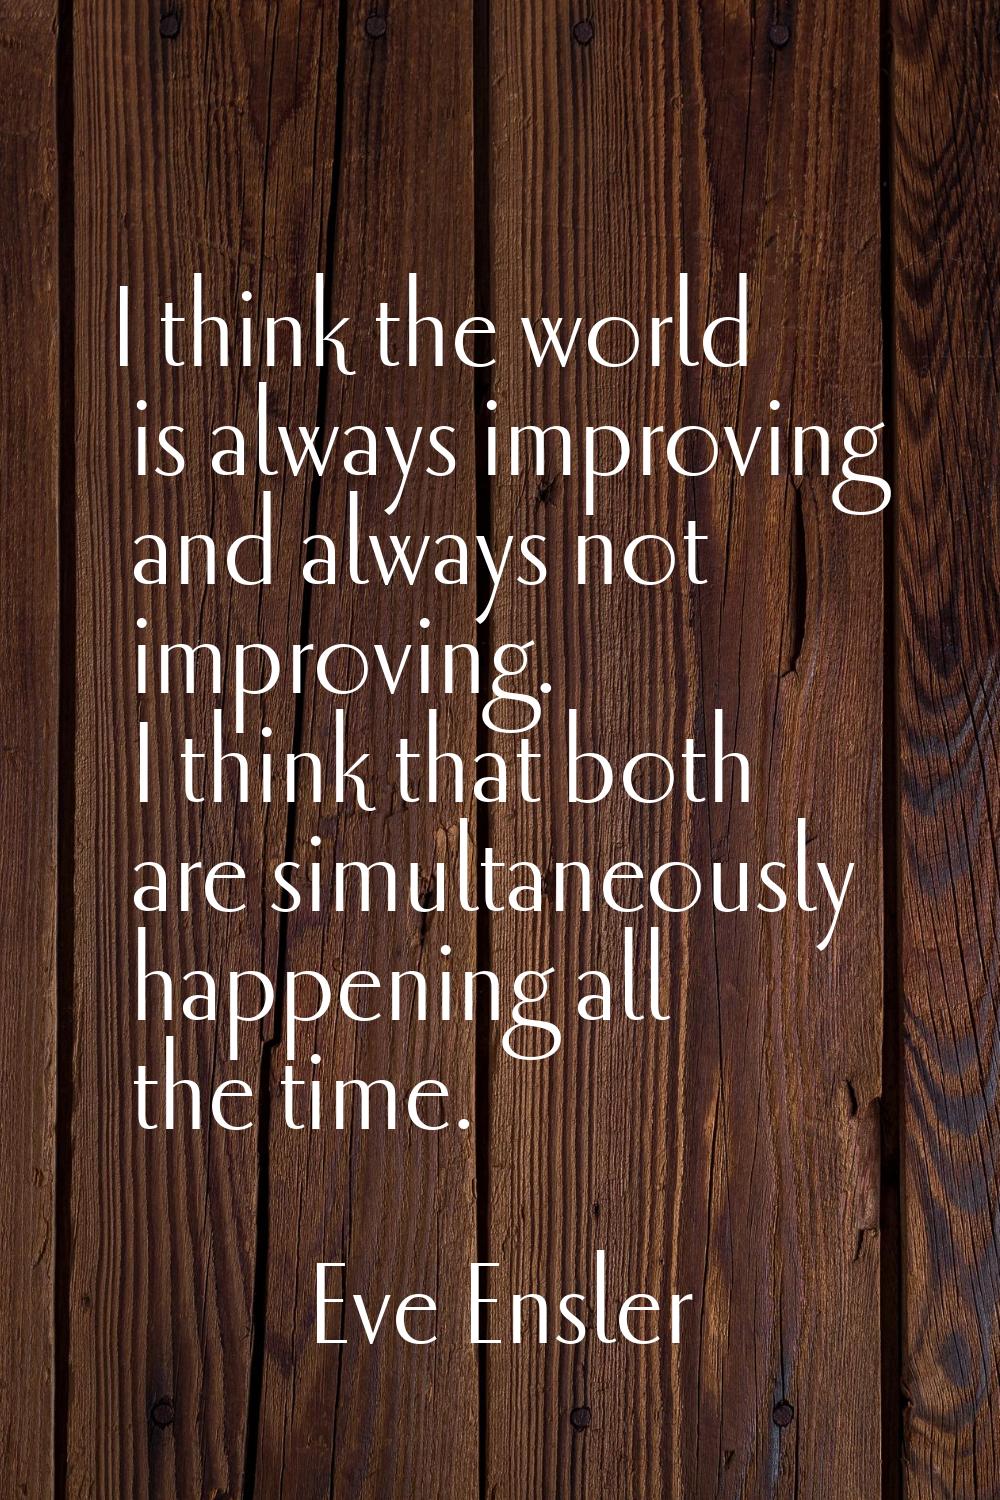 I think the world is always improving and always not improving. I think that both are simultaneousl